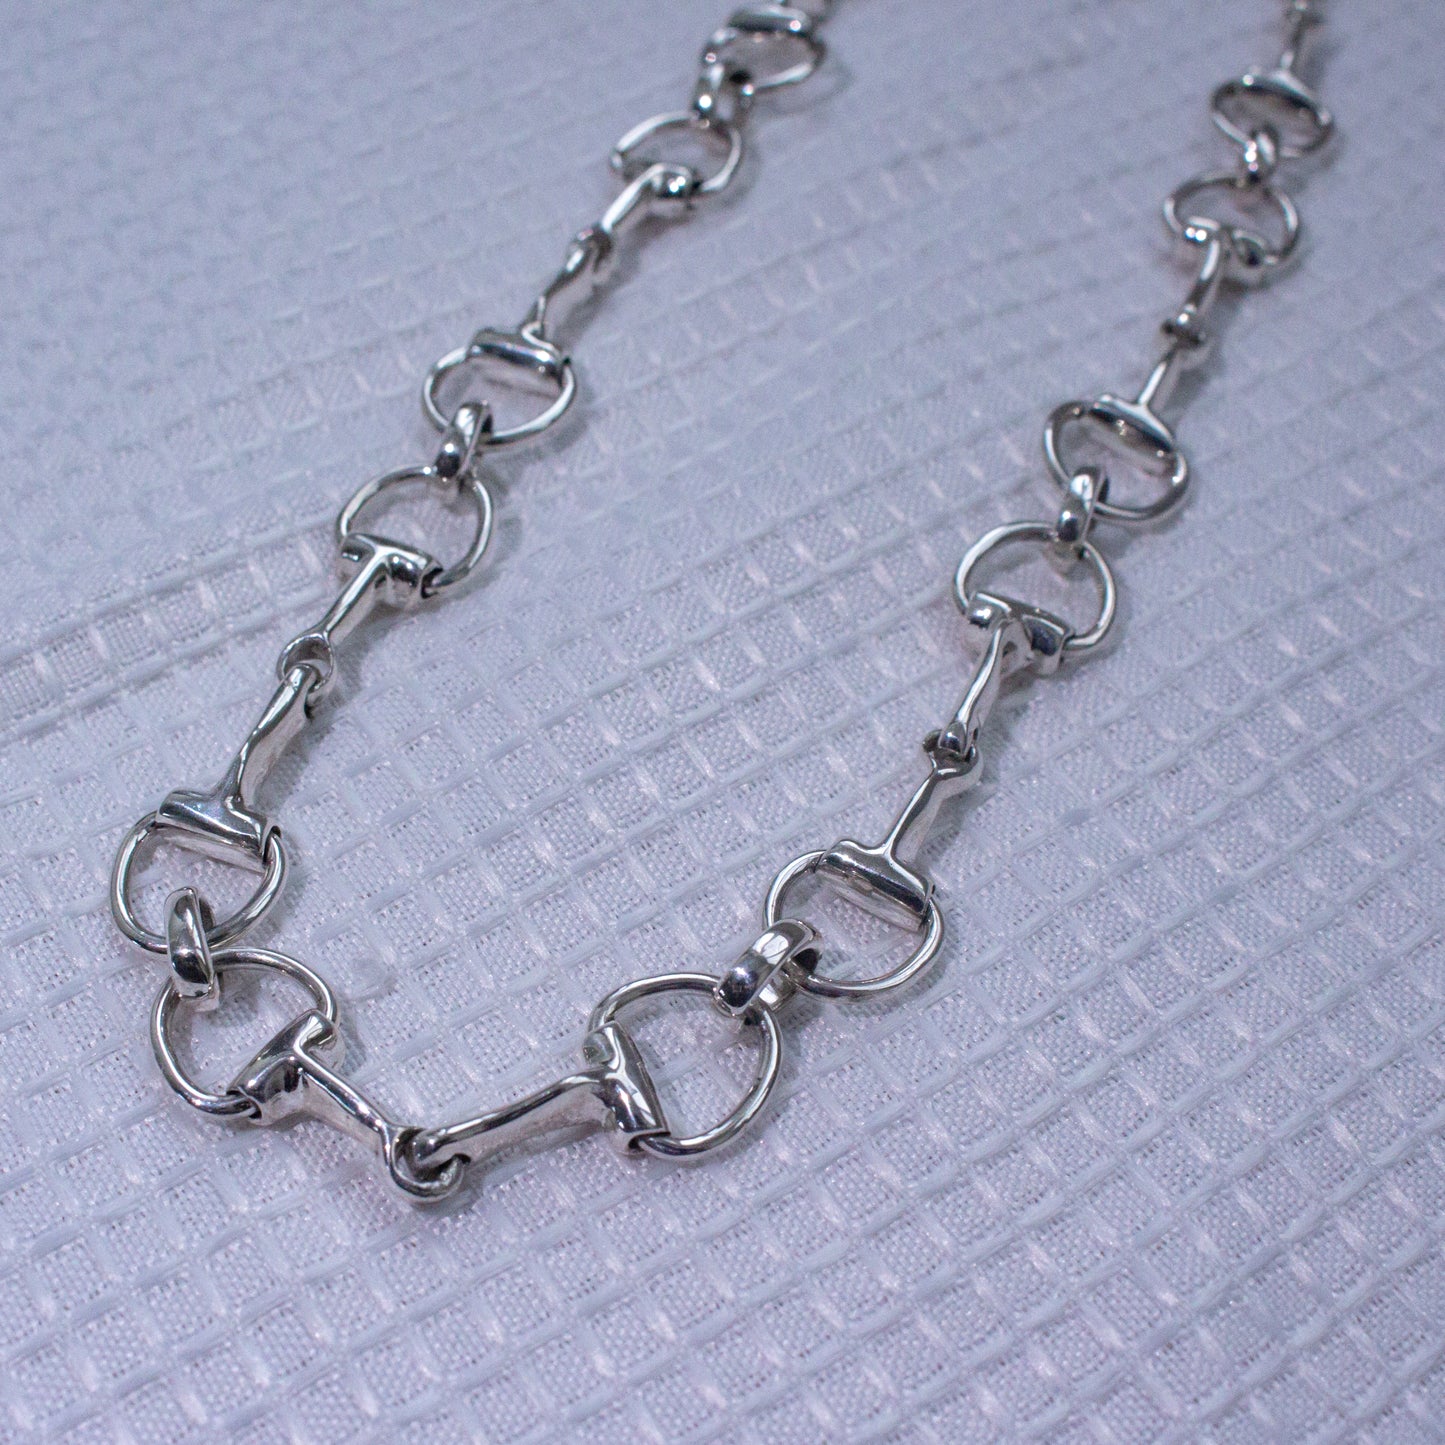 Small Horsebit Necklace (Sterling Silver 925)